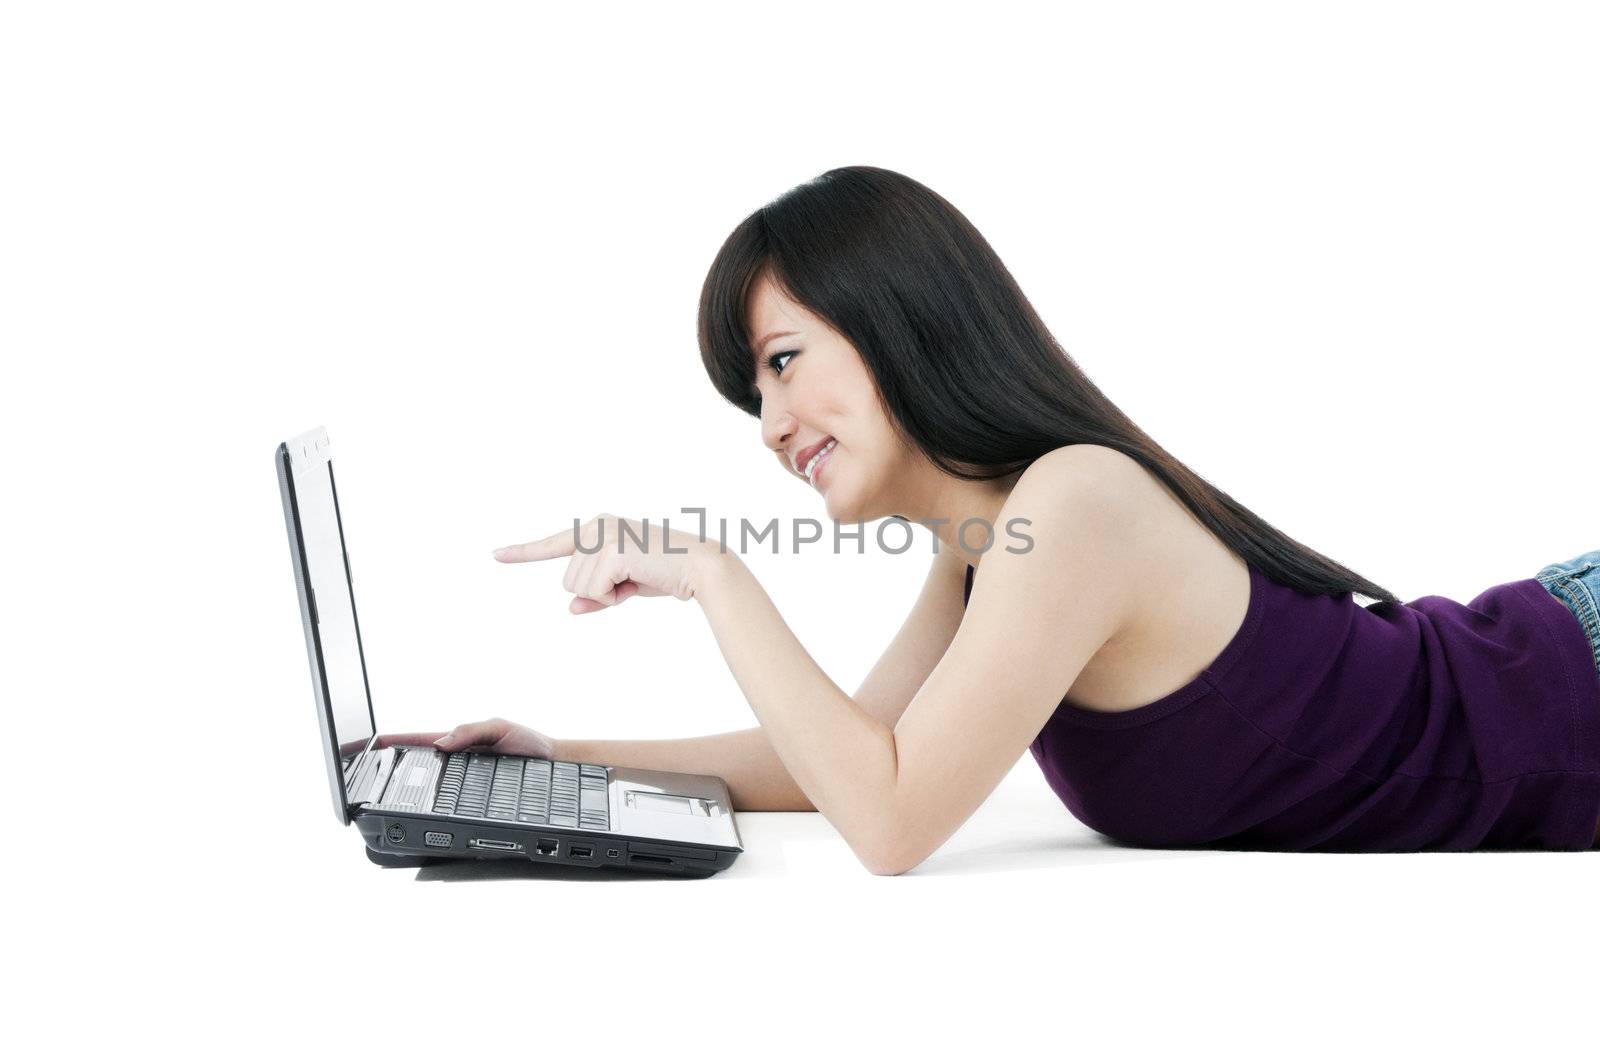 Portrait of a young Asian woman lying on the floor and pointing at laptop over white background.